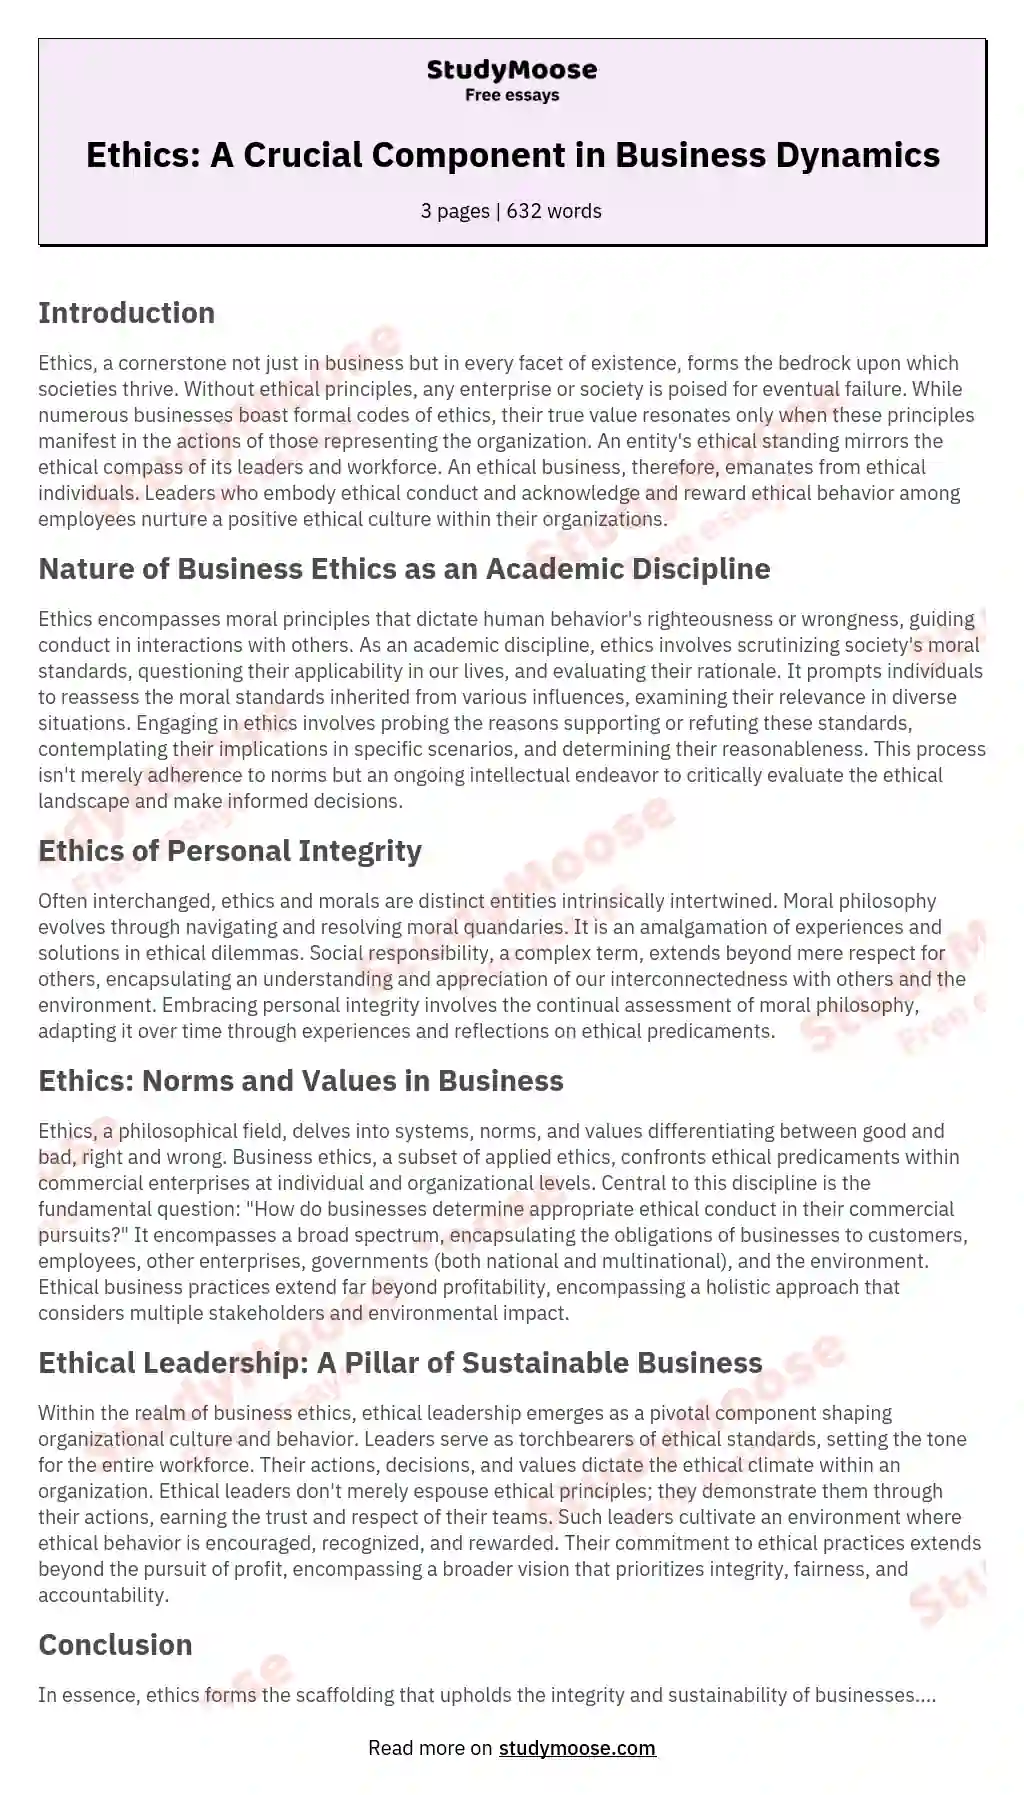 Ethics: A Crucial Component in Business Dynamics essay